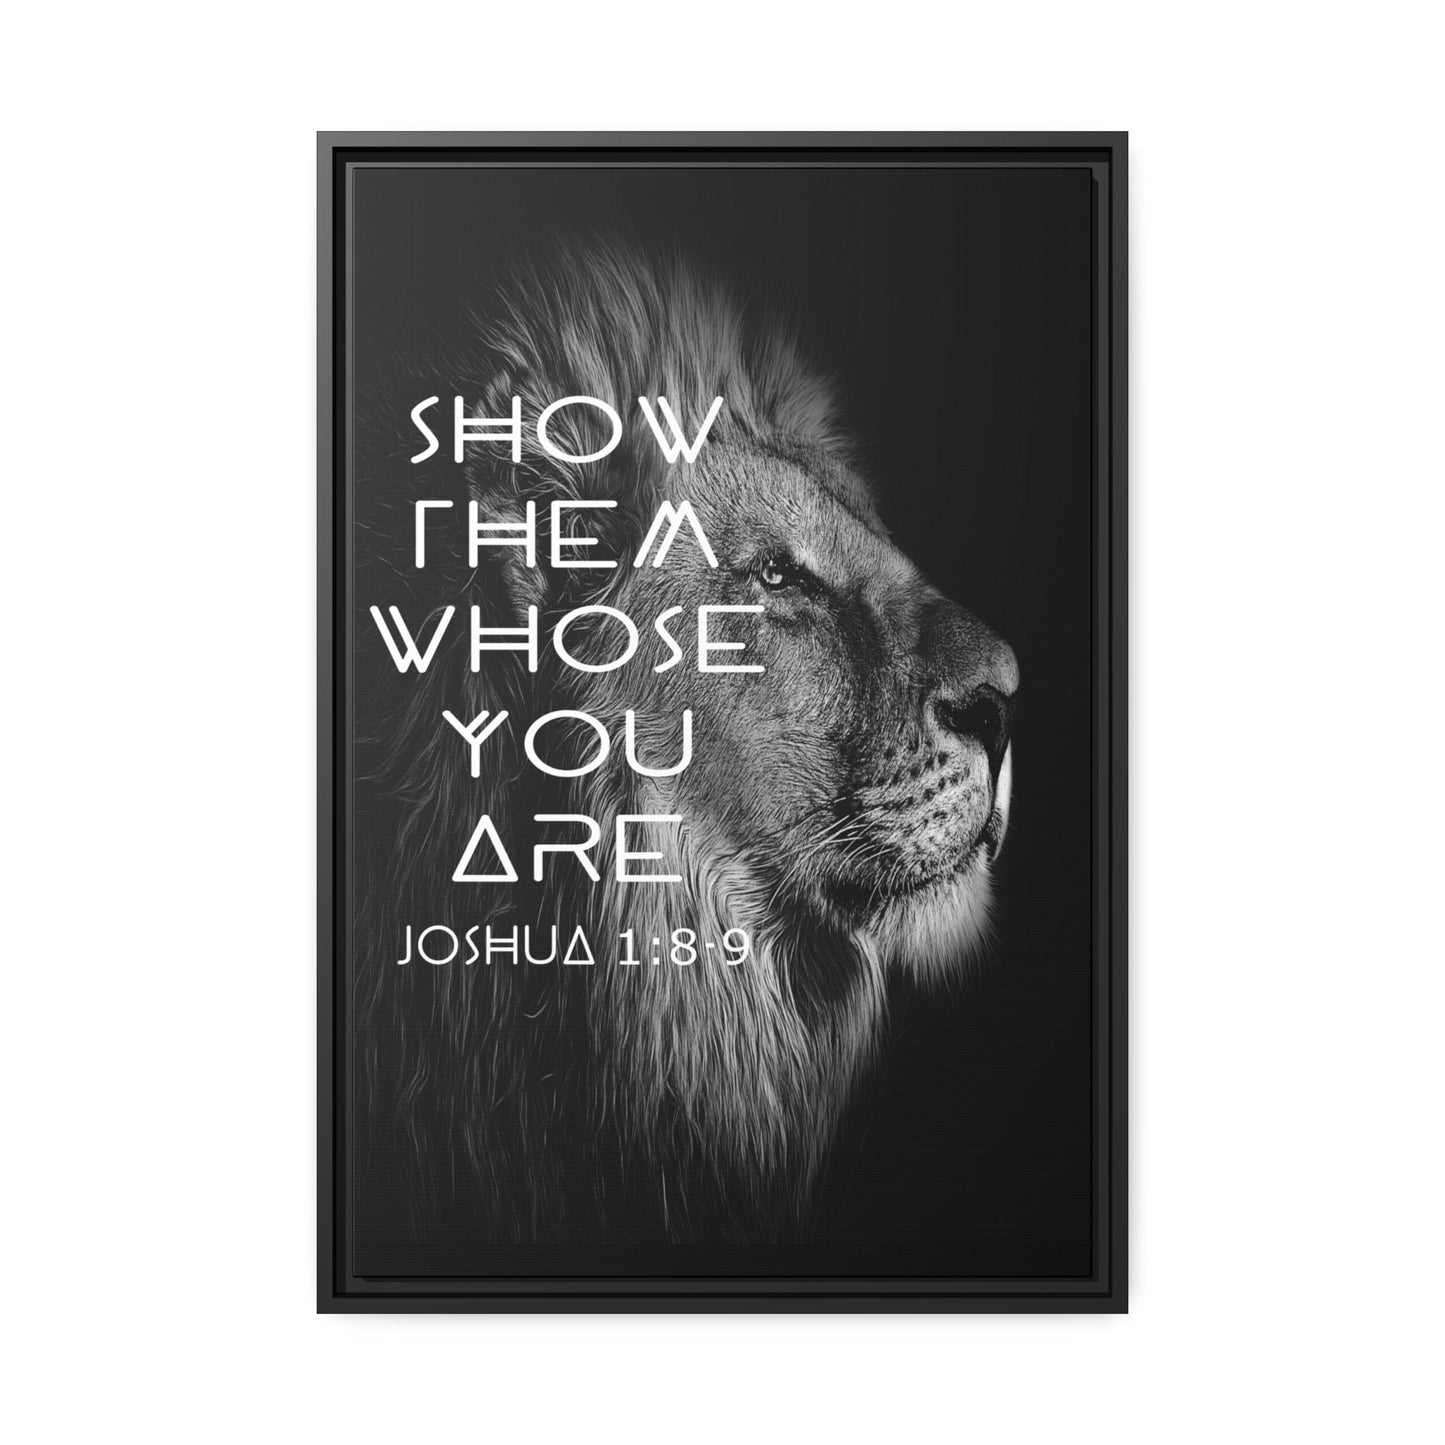 Printify Canvas 20″ x 30″ (Vertical) / Black / 1.25" Show Them Whose You Are - Joshua 1:8-9 Christian Canvas Wall Art